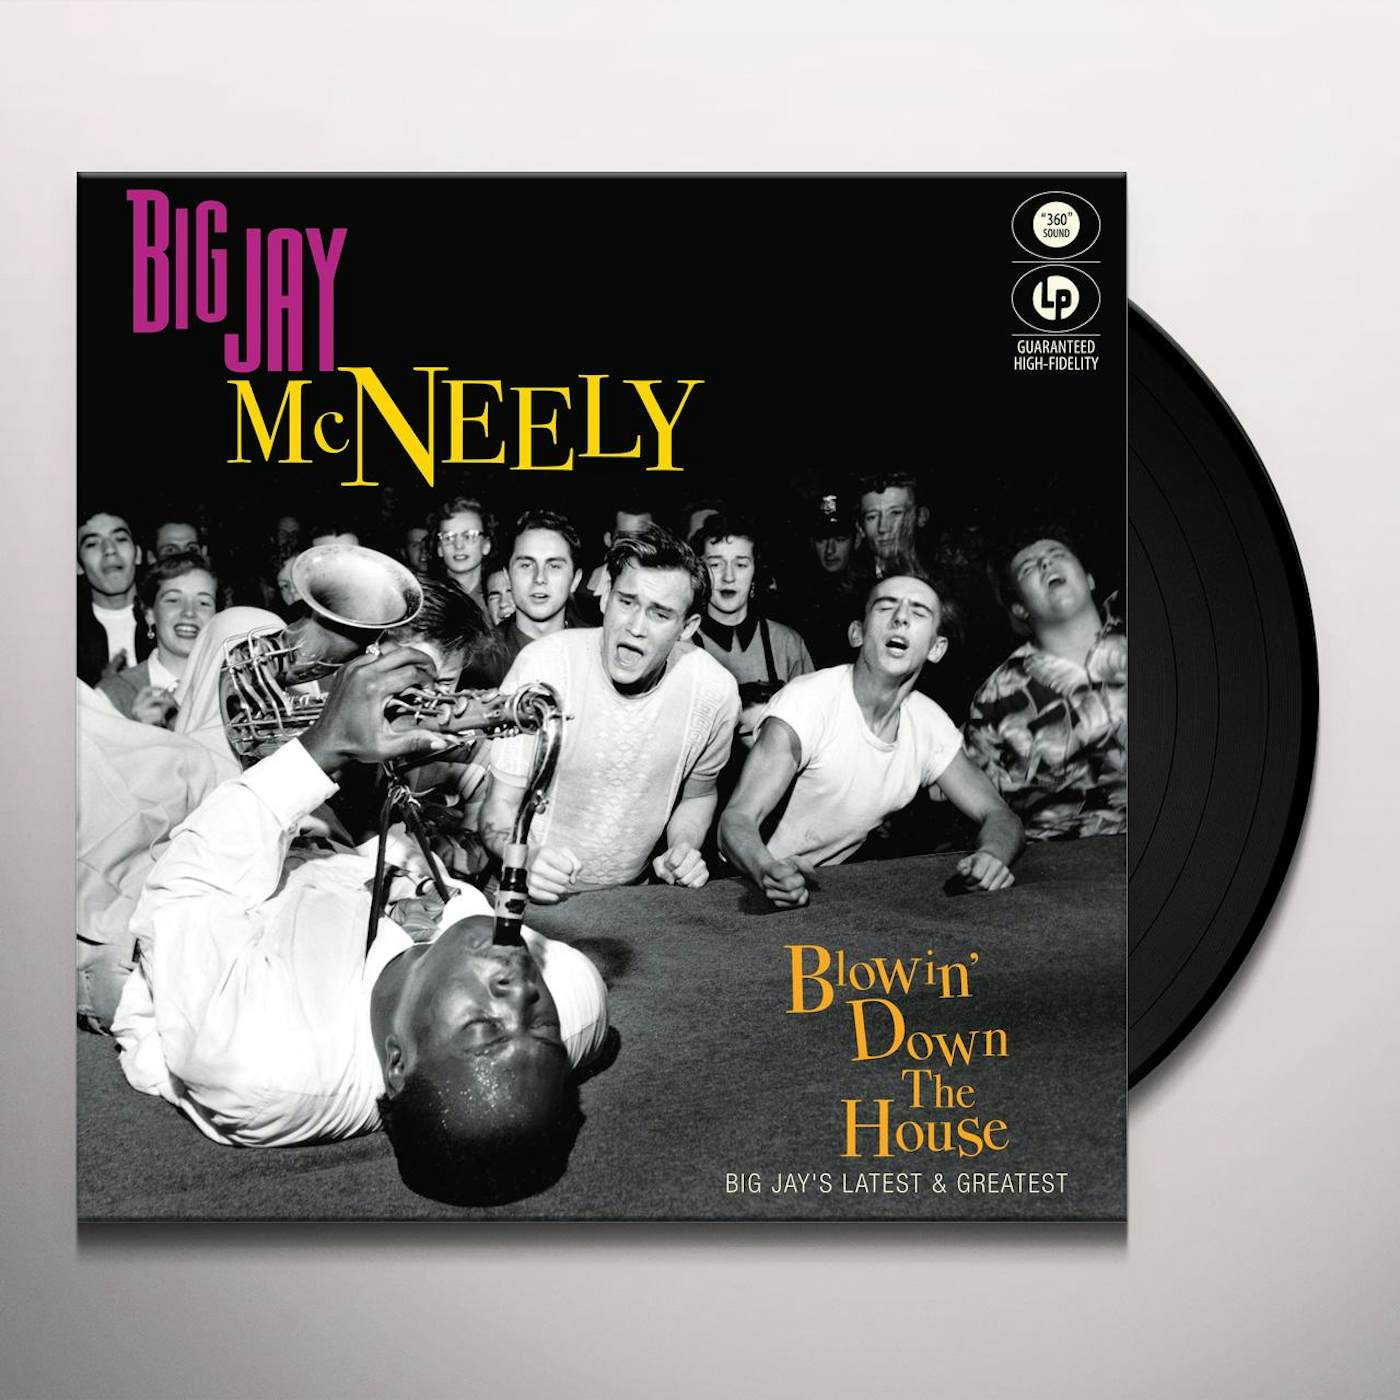 Big Jay McNeely BLOWIN' DOWN THE HOUSE-BIG JAY'S LATEST & GREATEST Vinyl Record